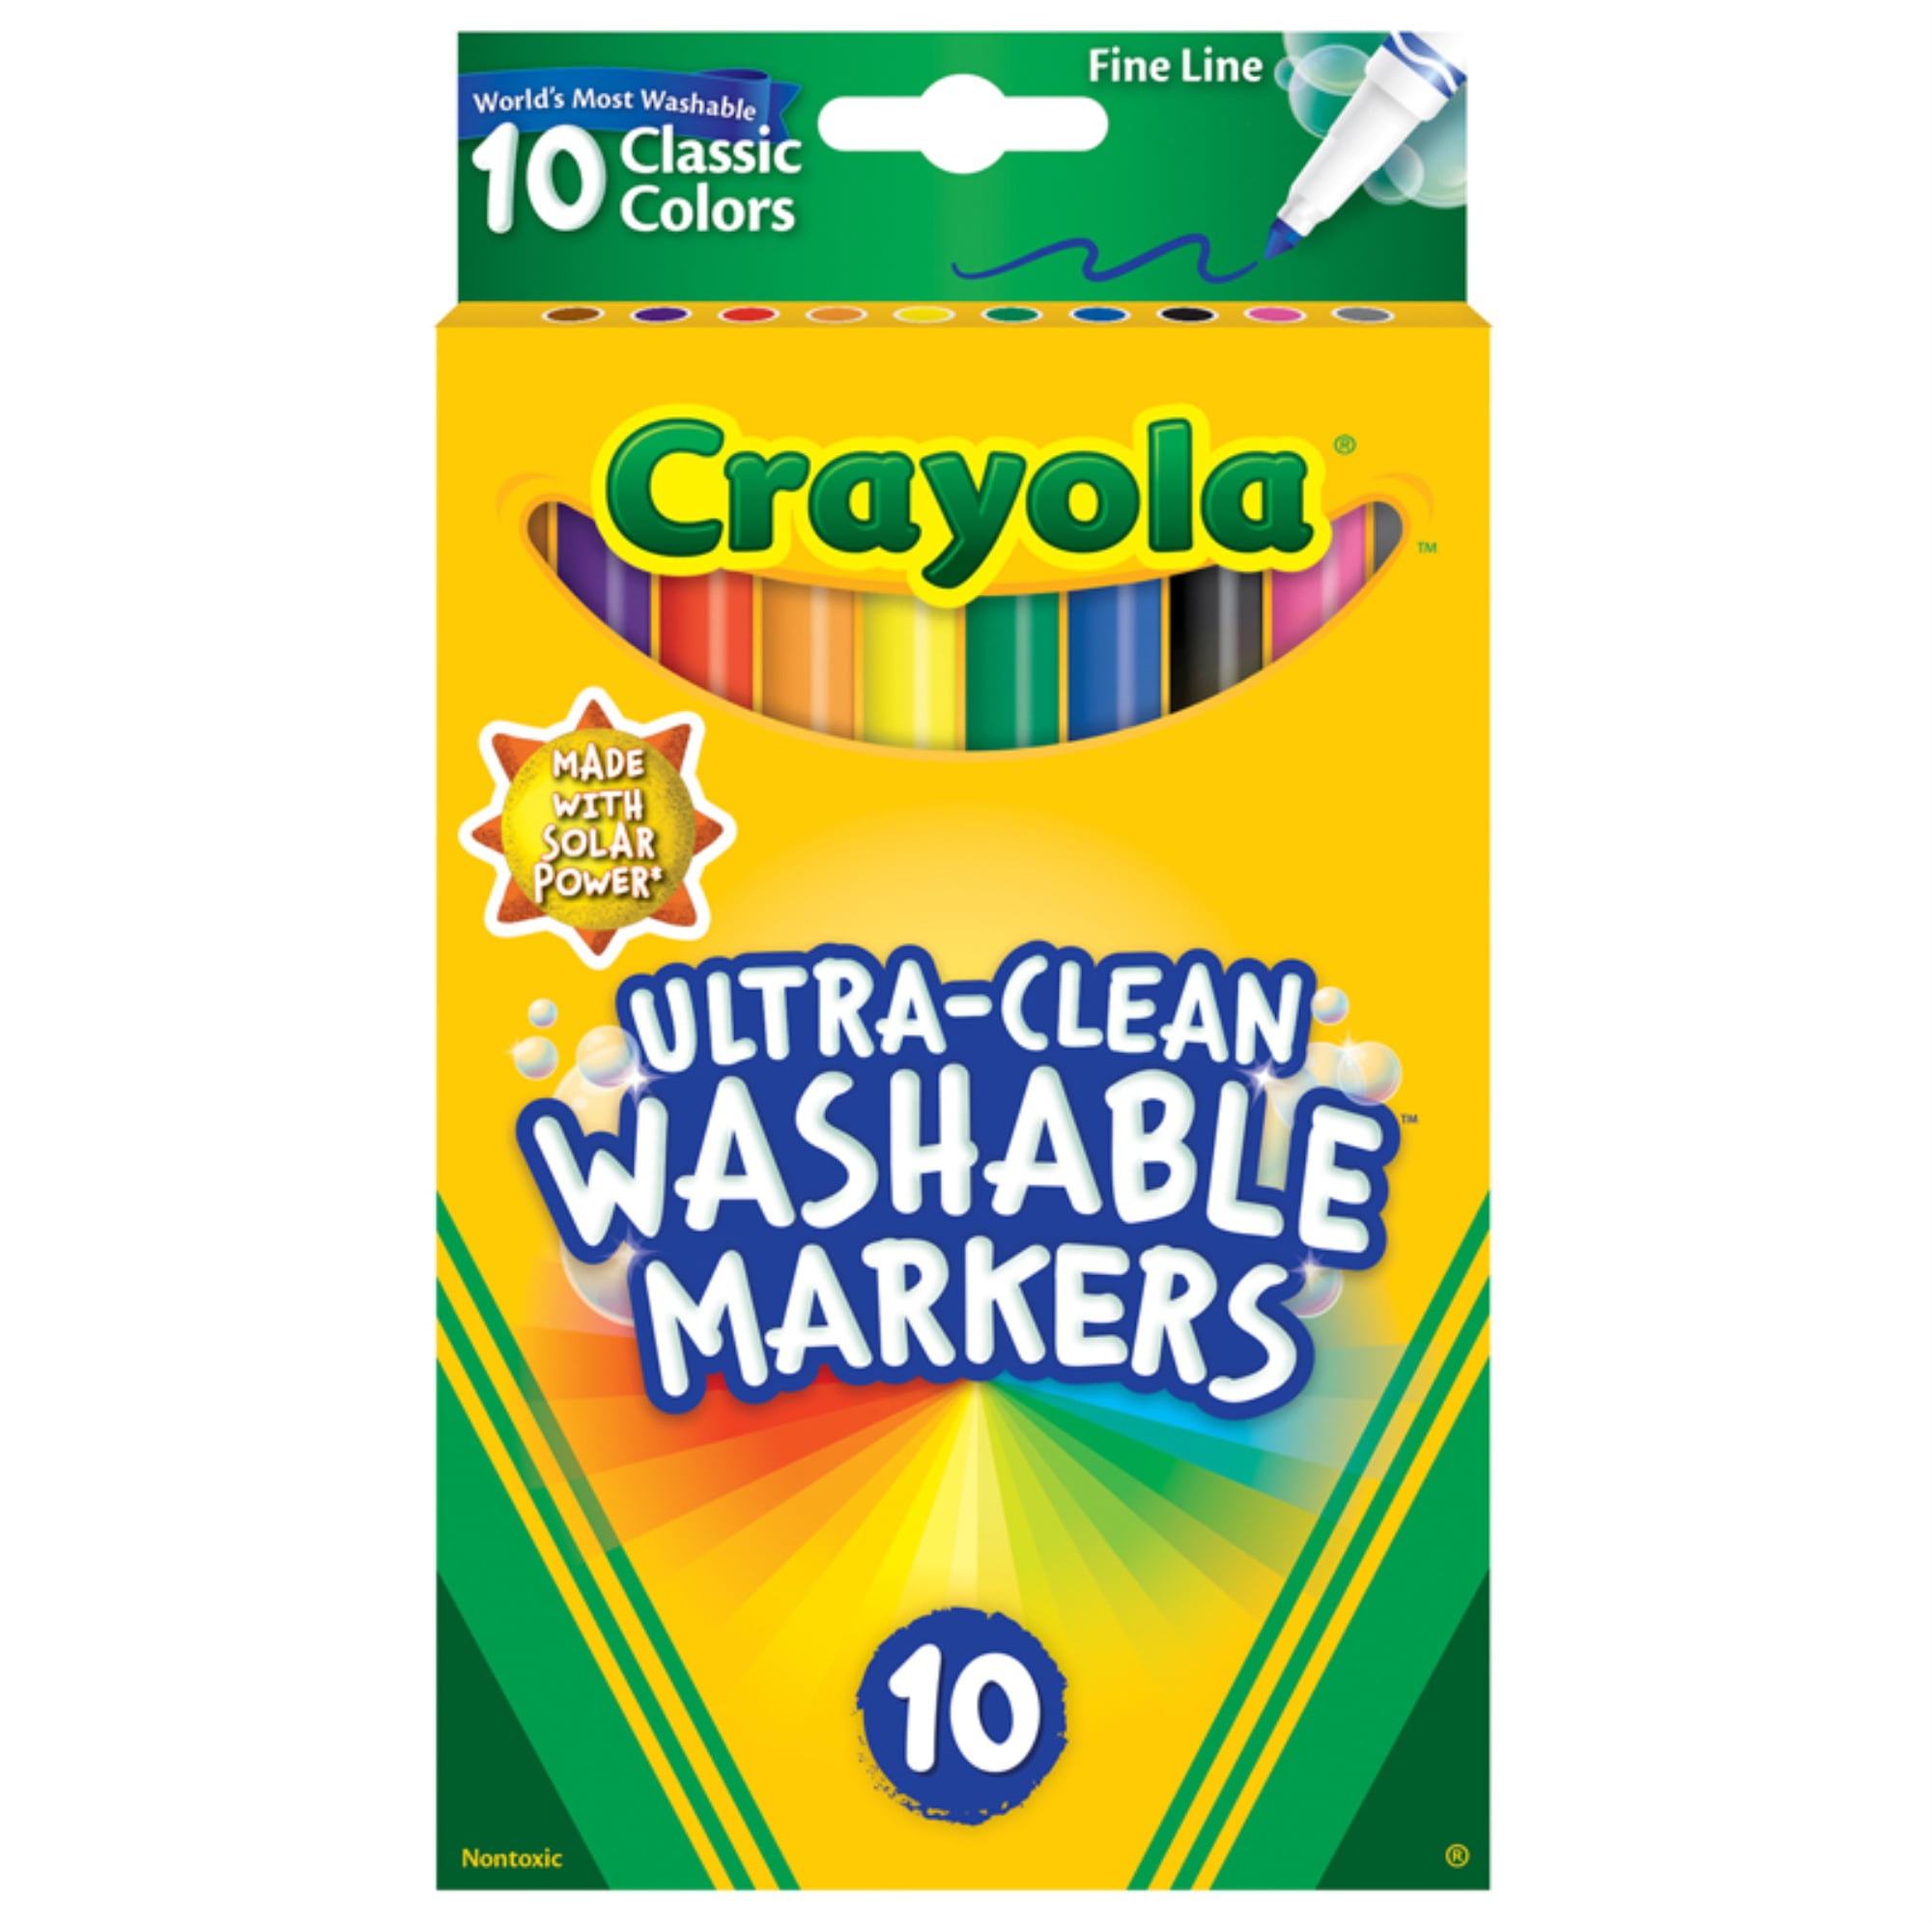 Cra-Z-Art Washable Markers, 10 Count